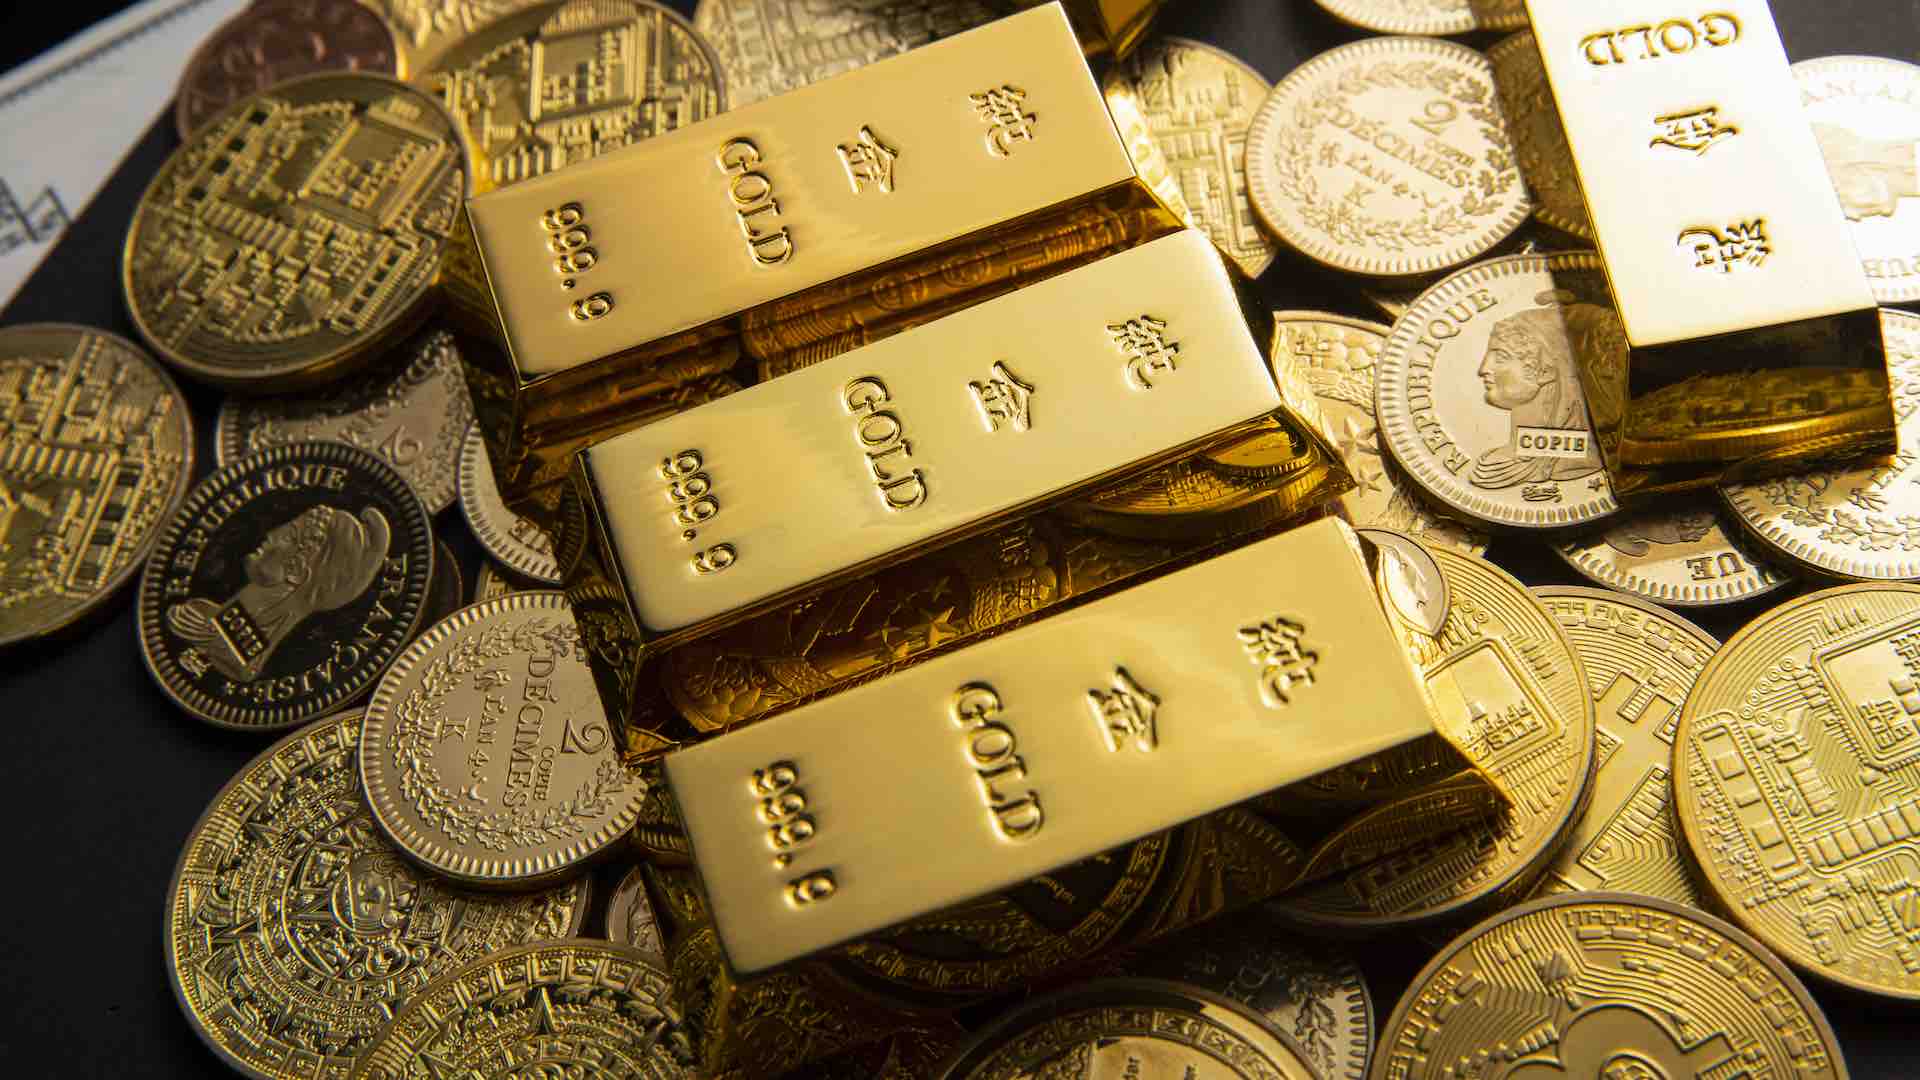 Gold prices surge to record highs, caution urged